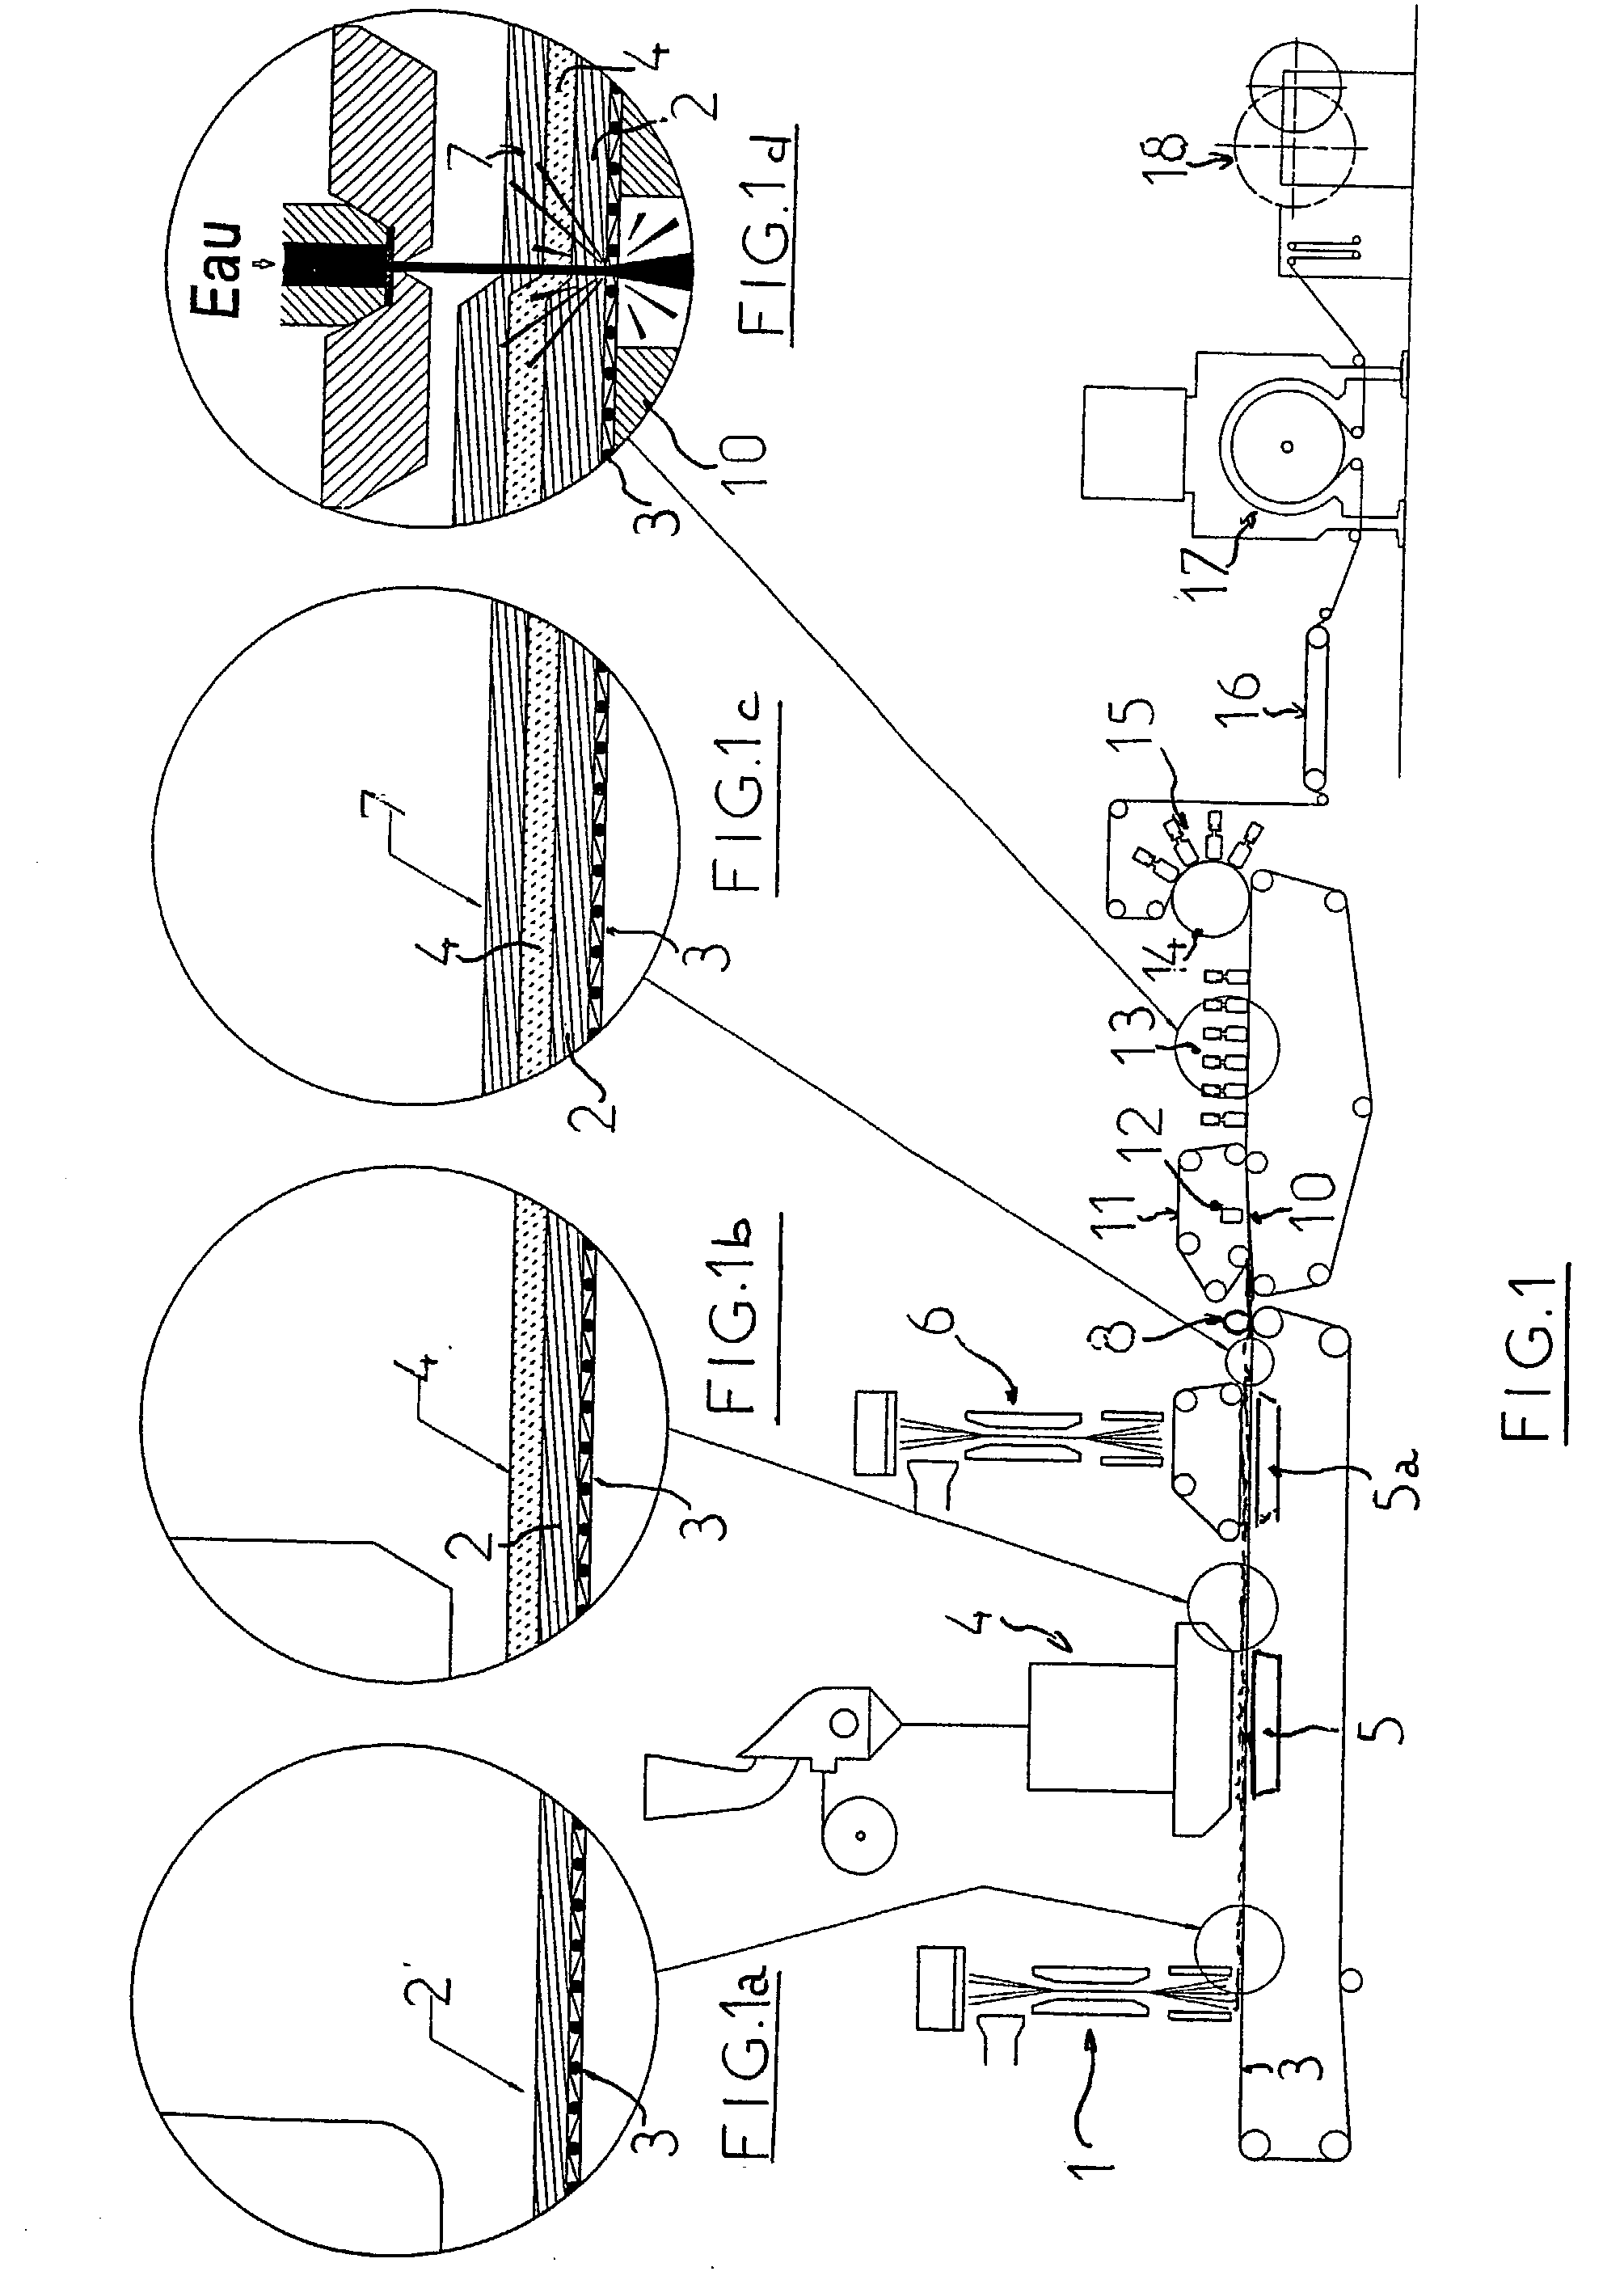 Method for producing a complex nonwoven fabric and resulting novel fabric